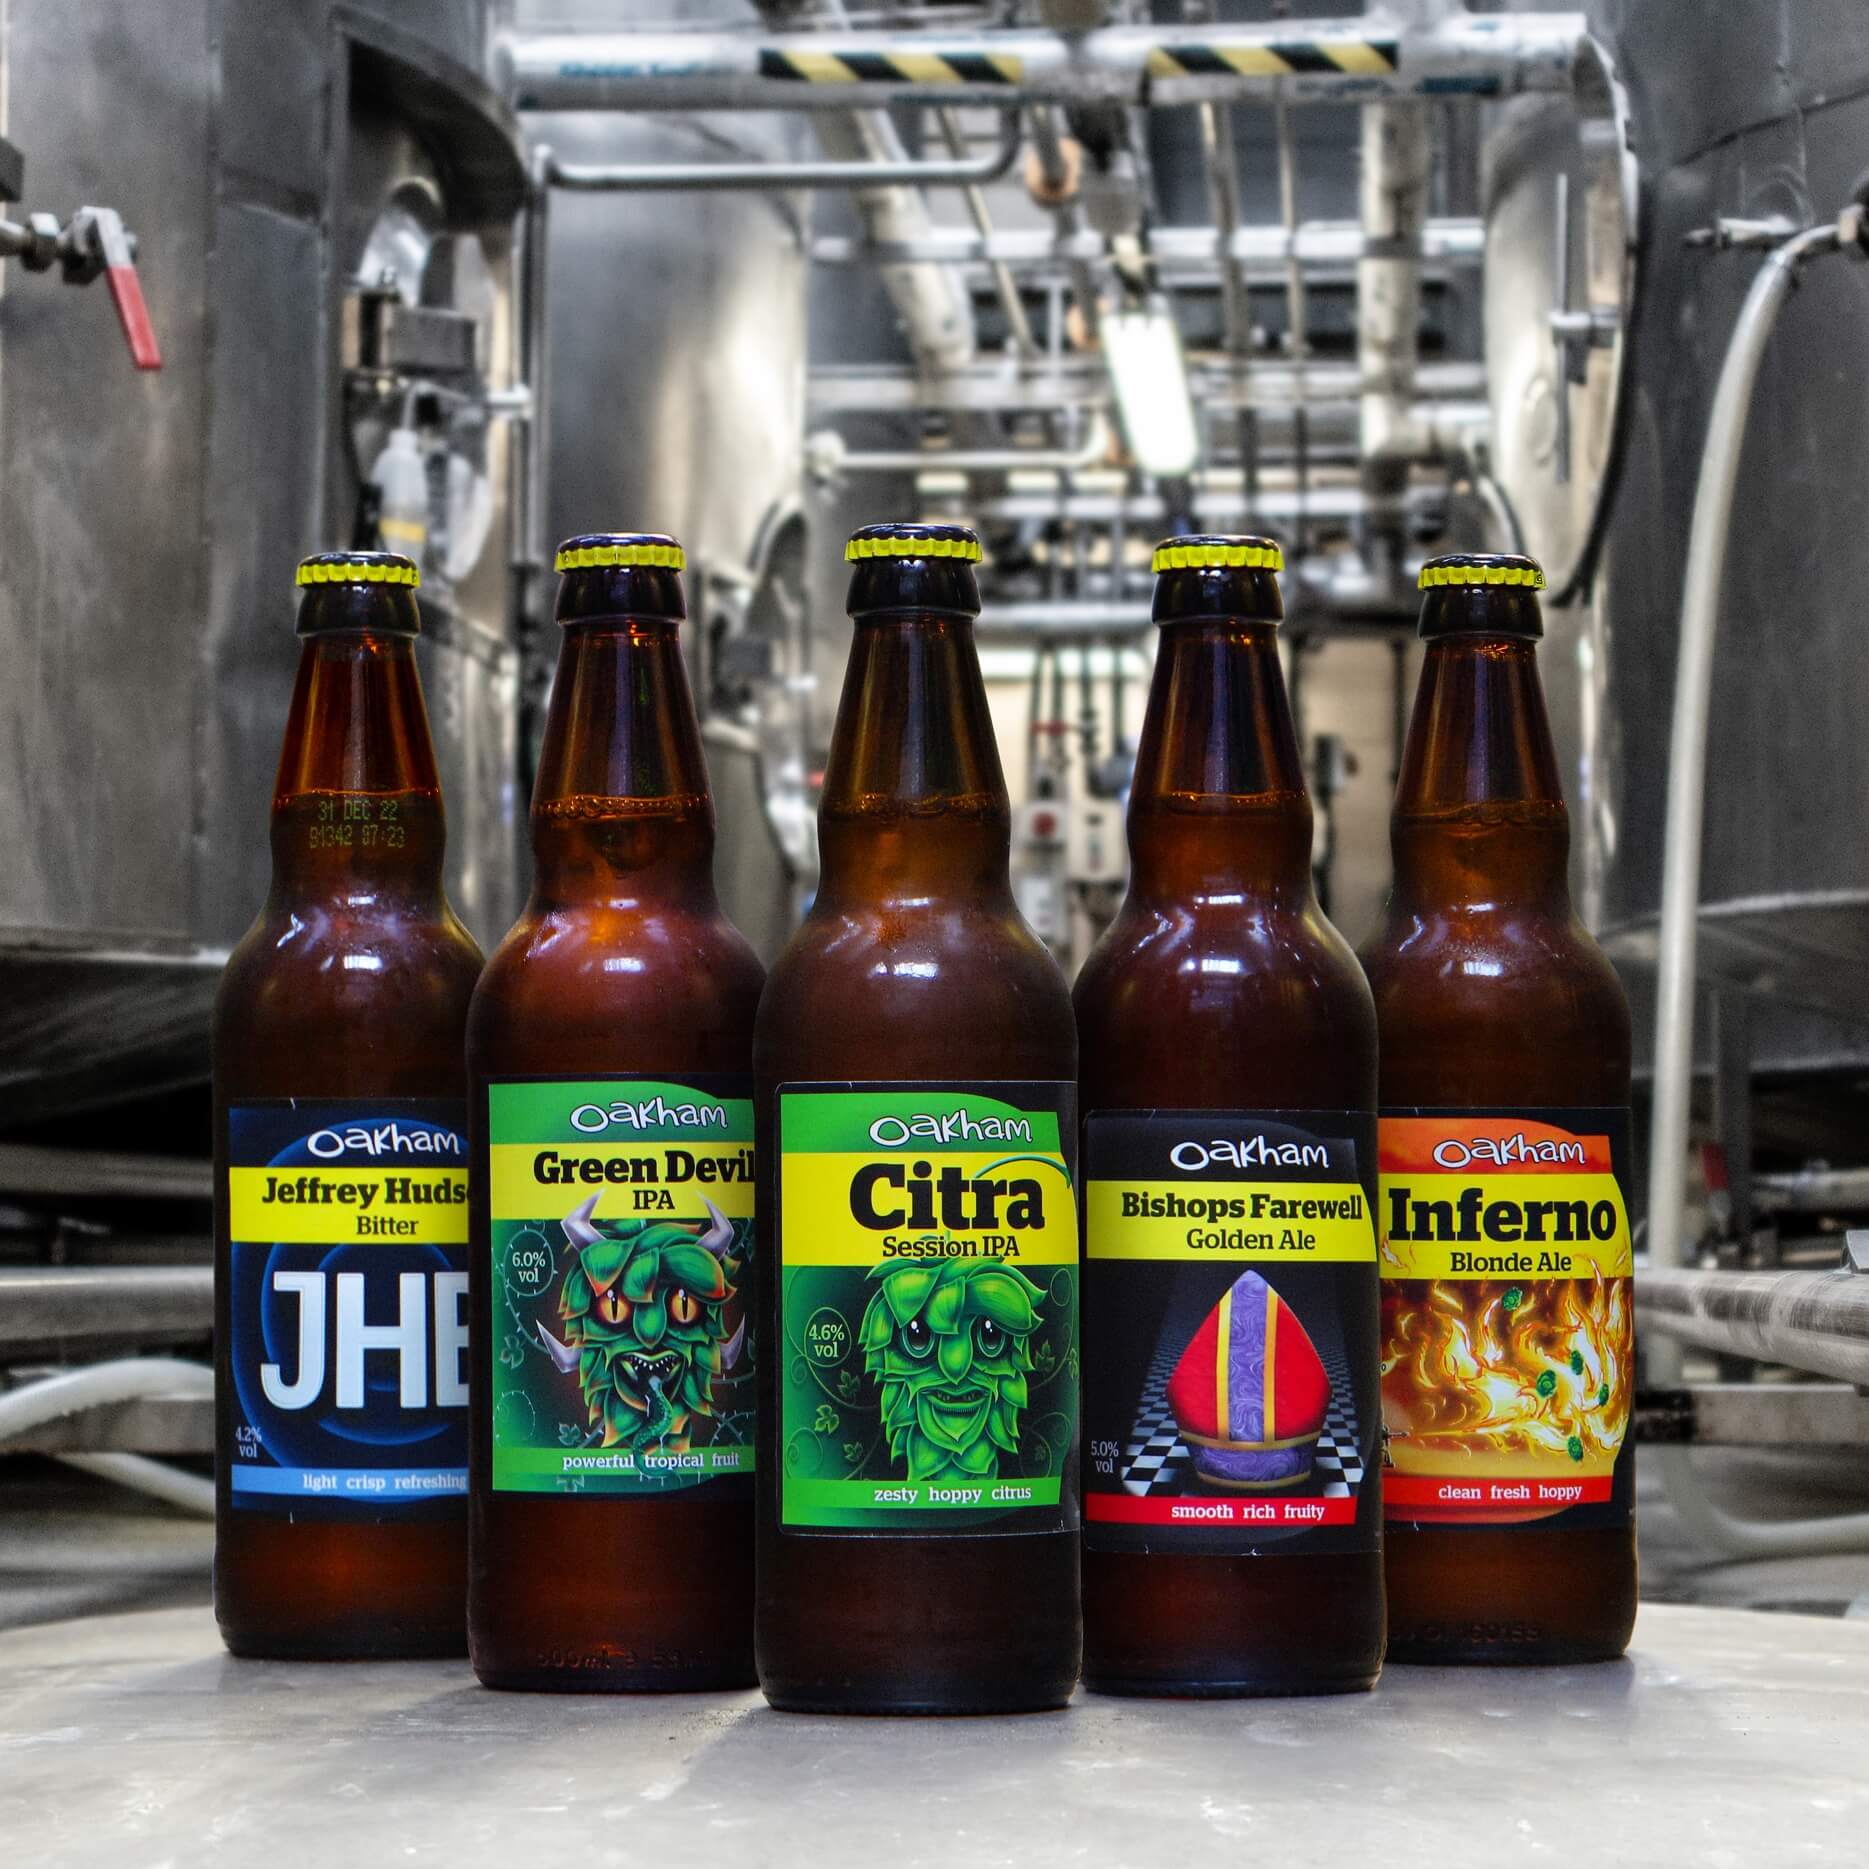 JHB, Green Devil IPA, Citra, Bishops Farewell and Inferno bottles